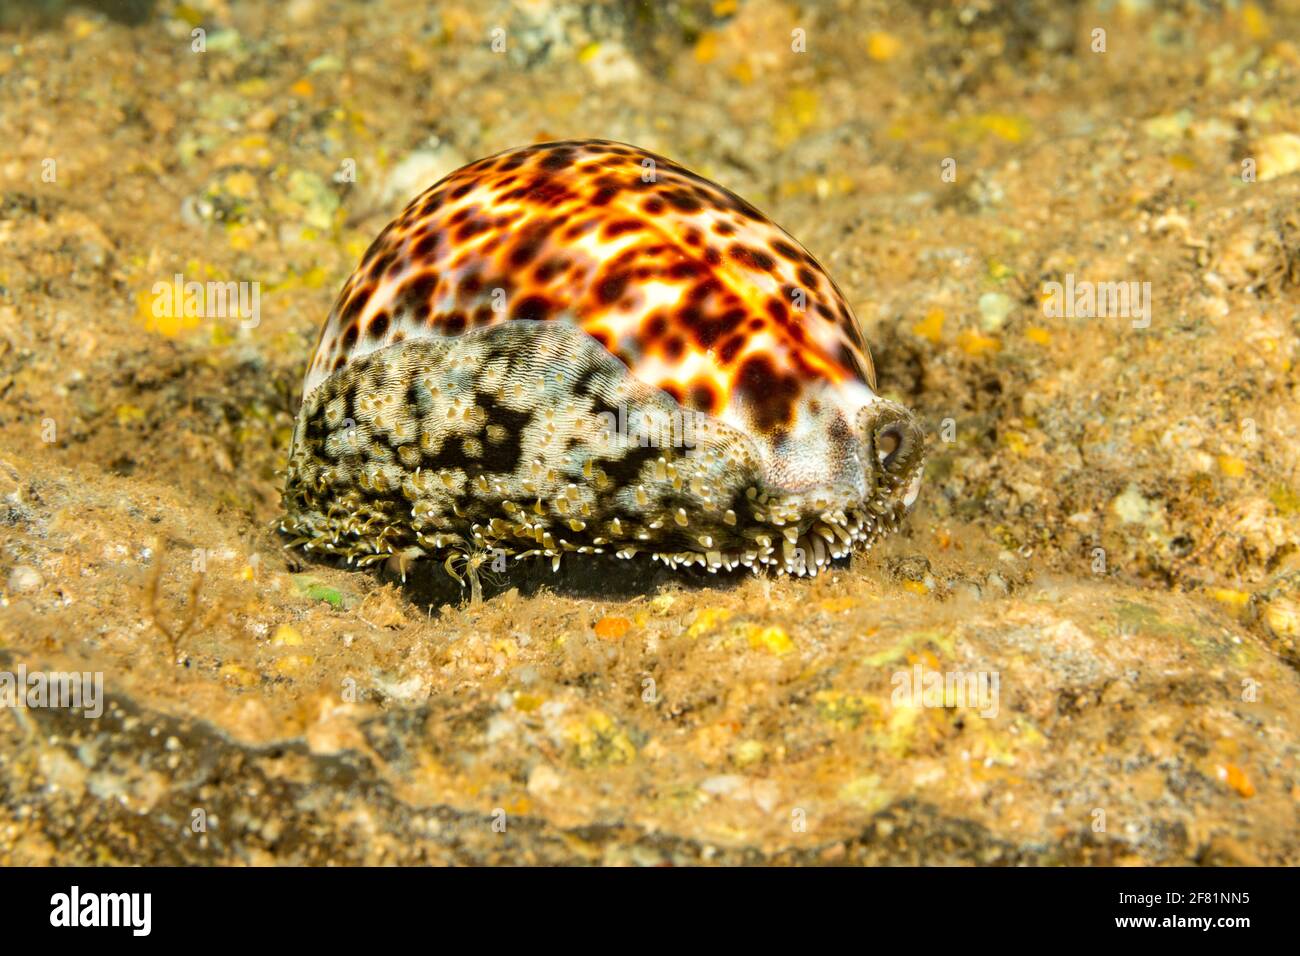 The tiger cowry, Cypraea tigris, is one of the larger and more common cowries in Hawaii. Stock Photo